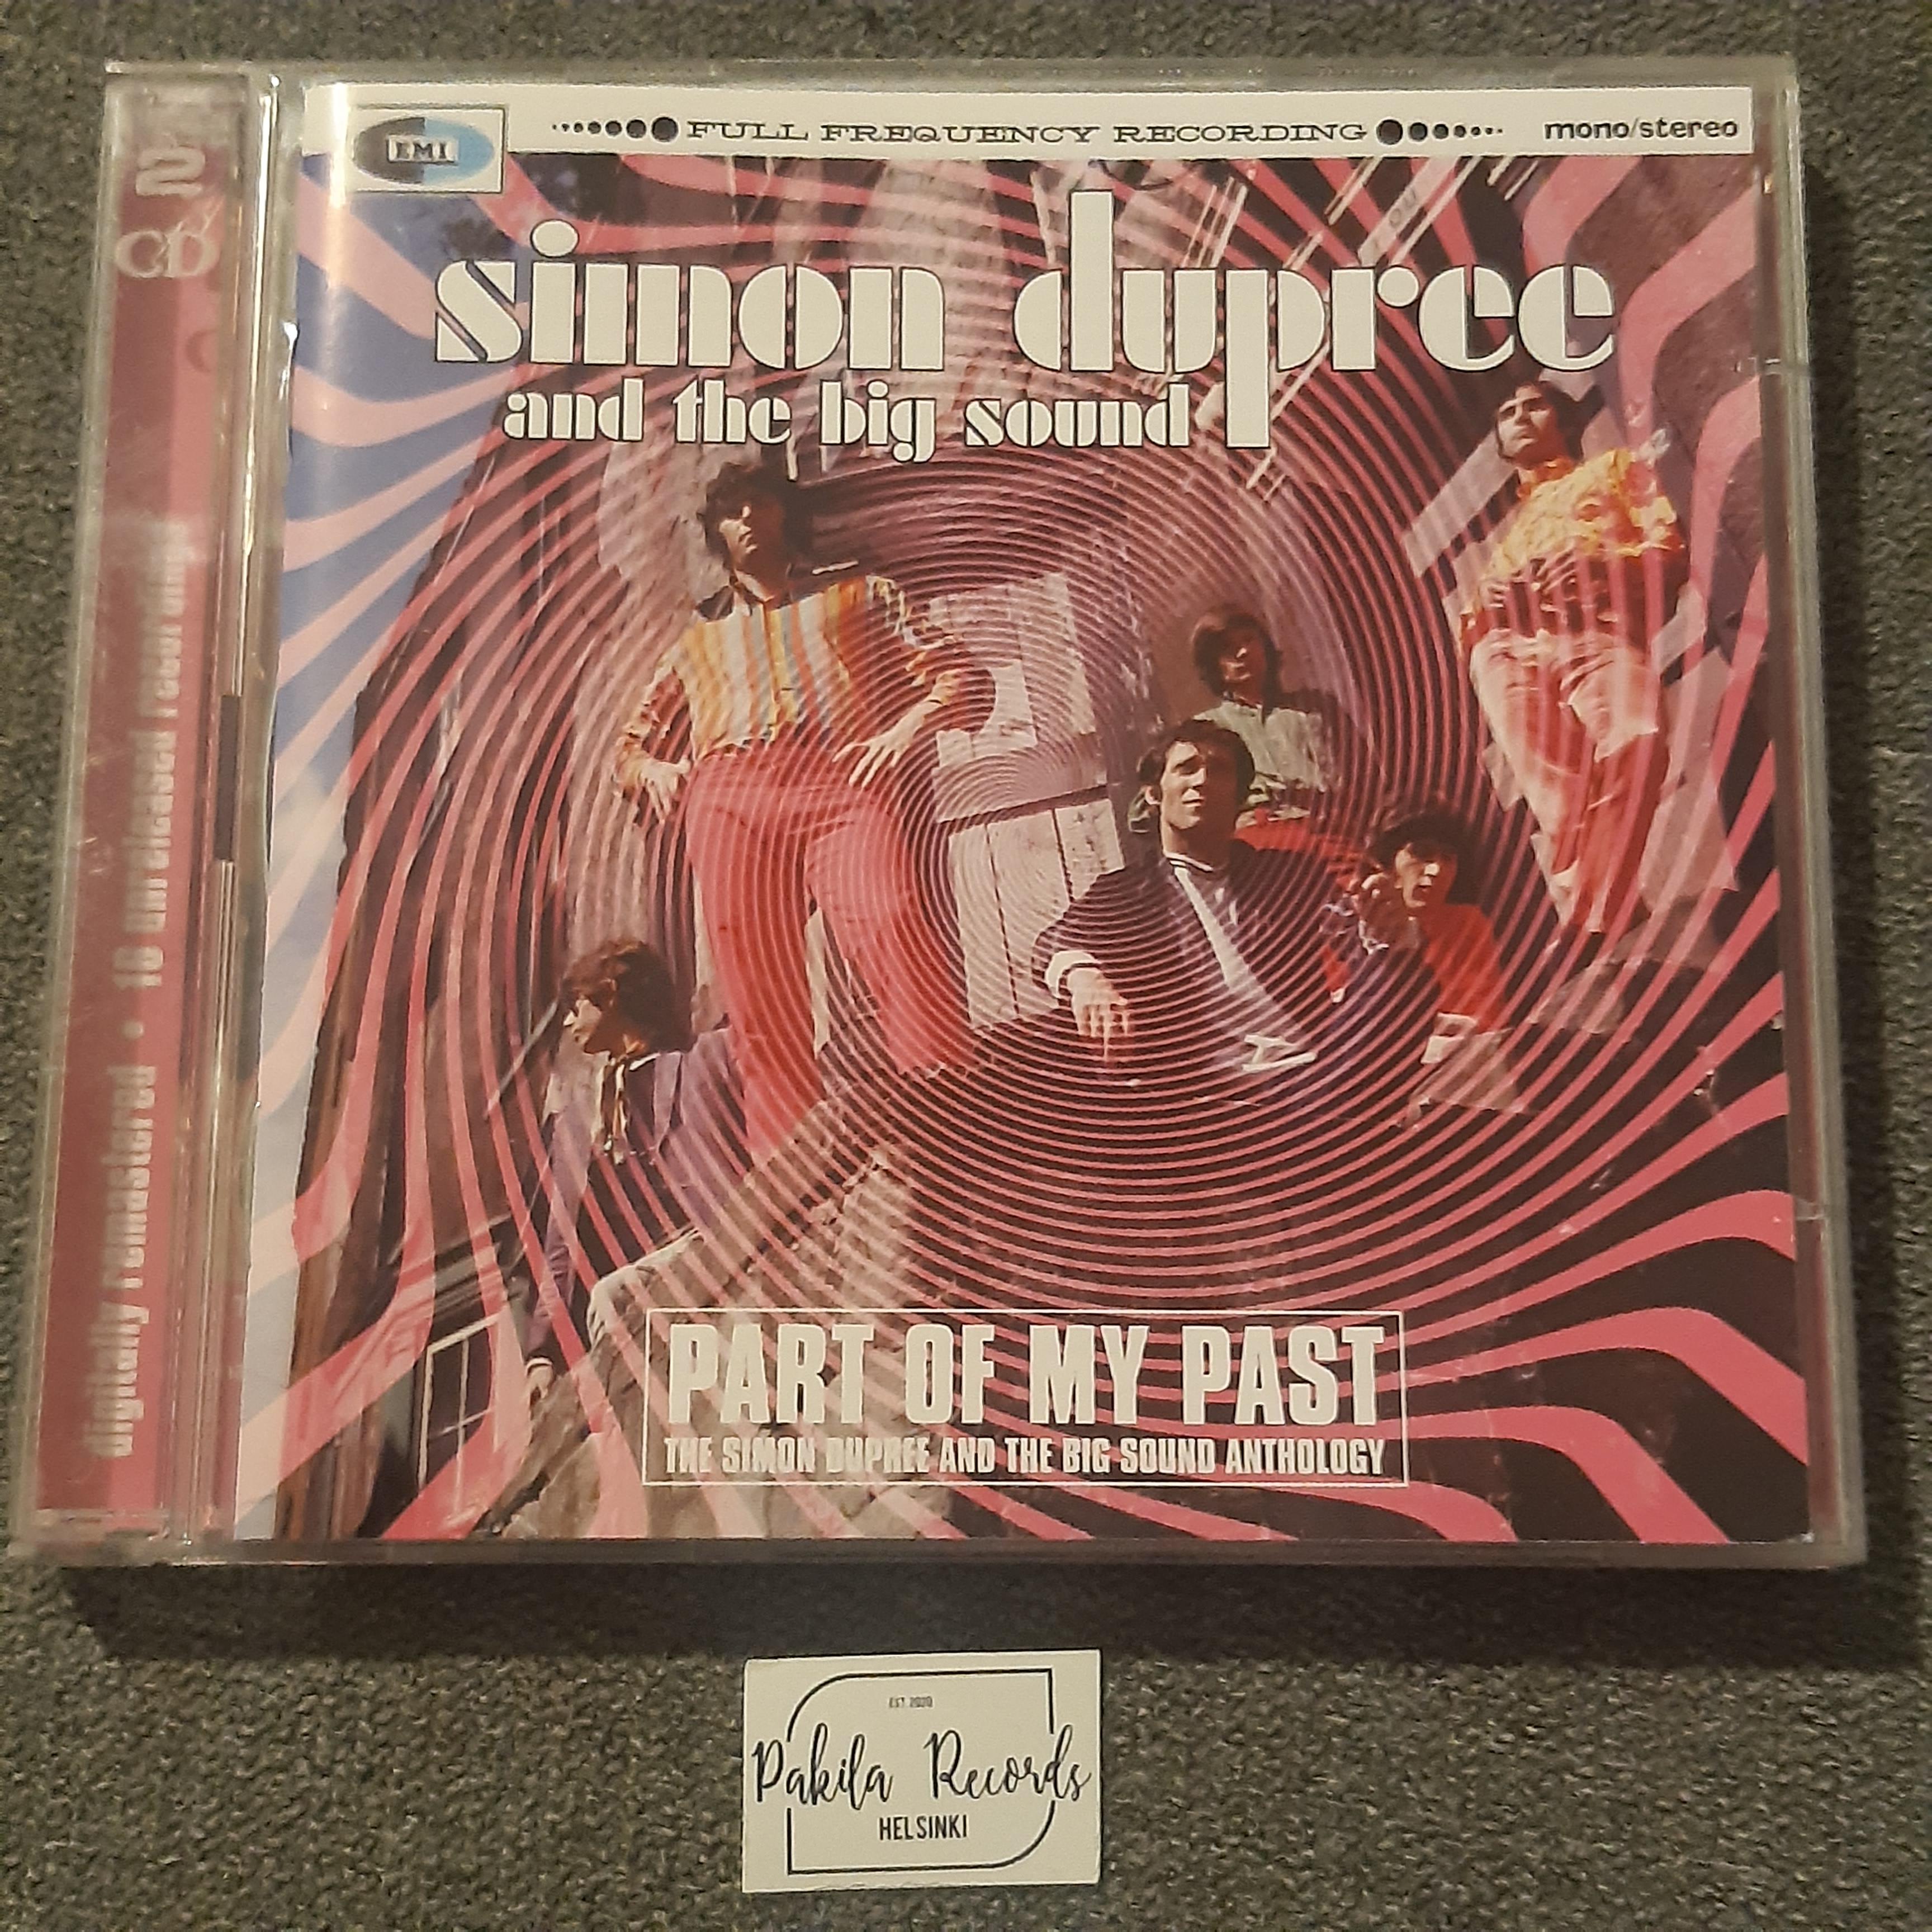 Simon Dupree And The Big Sound - Part Of My Pass - 2 CD (käytetty)